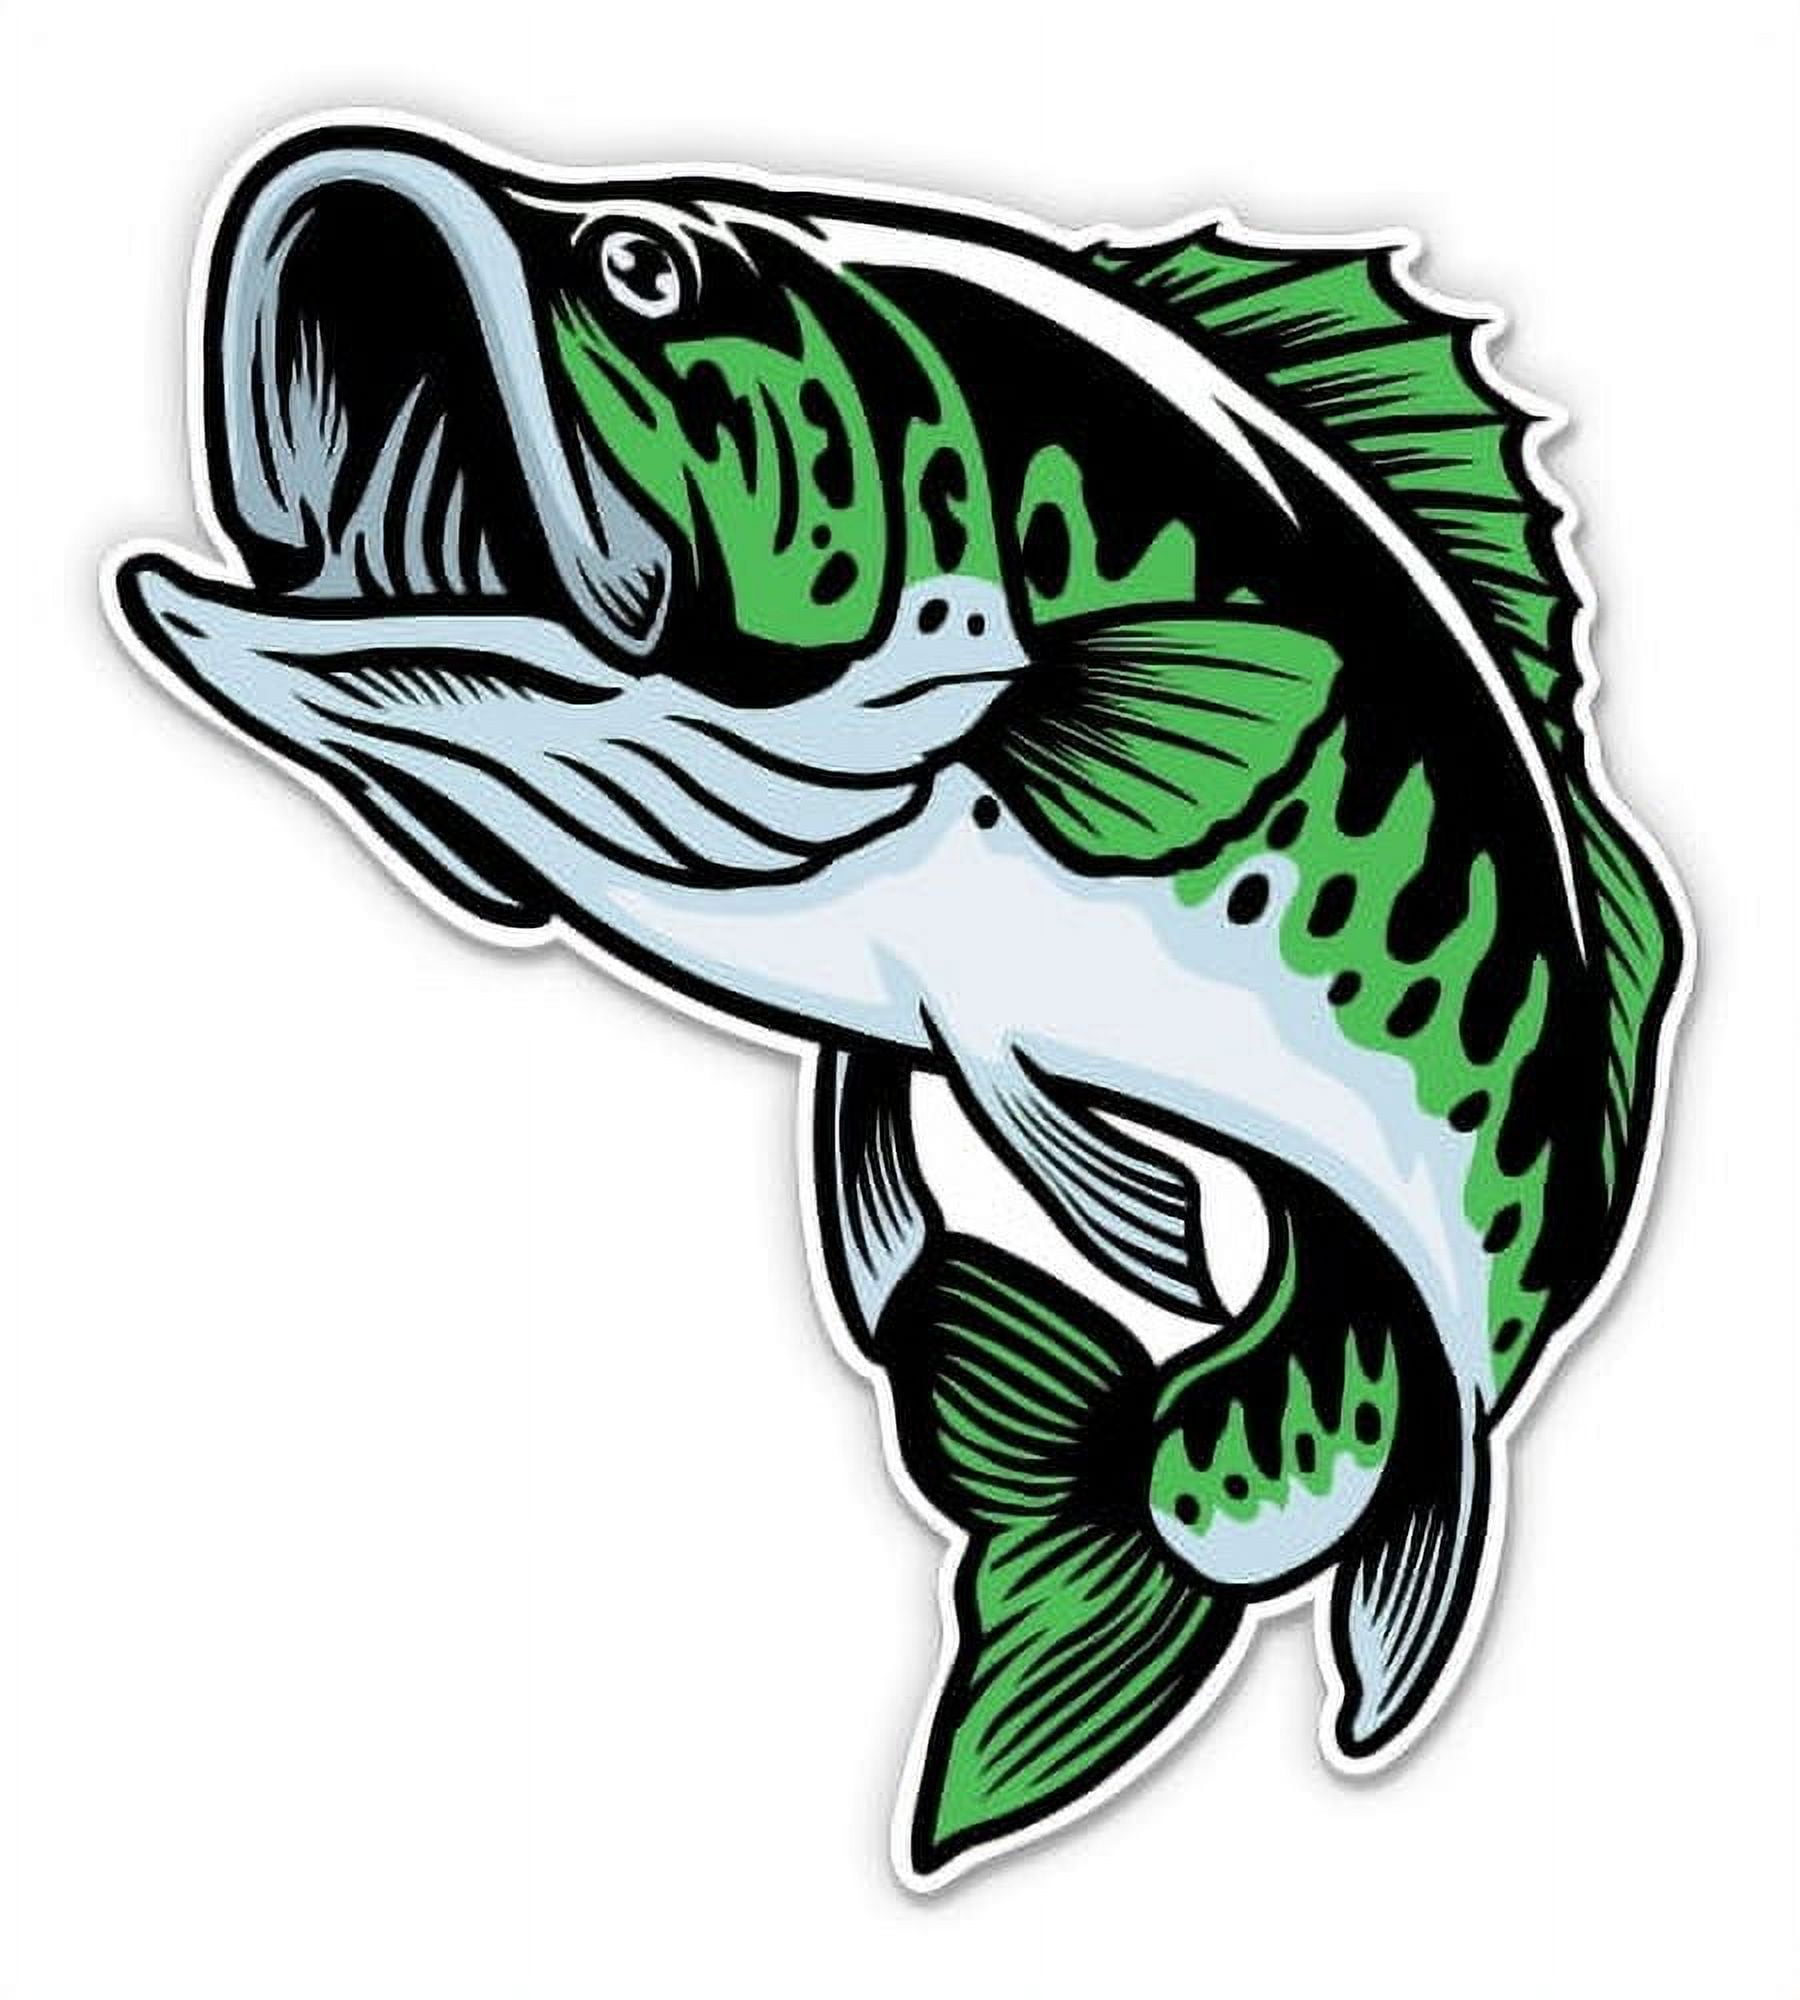 Large Mouth Bass Beautiful Fish Decal | Fishing decal for Boat, Car,  Vehicle, Truck Etc. | Waterproof Vinyl Sticker | Many Sizes & Styles  Available 